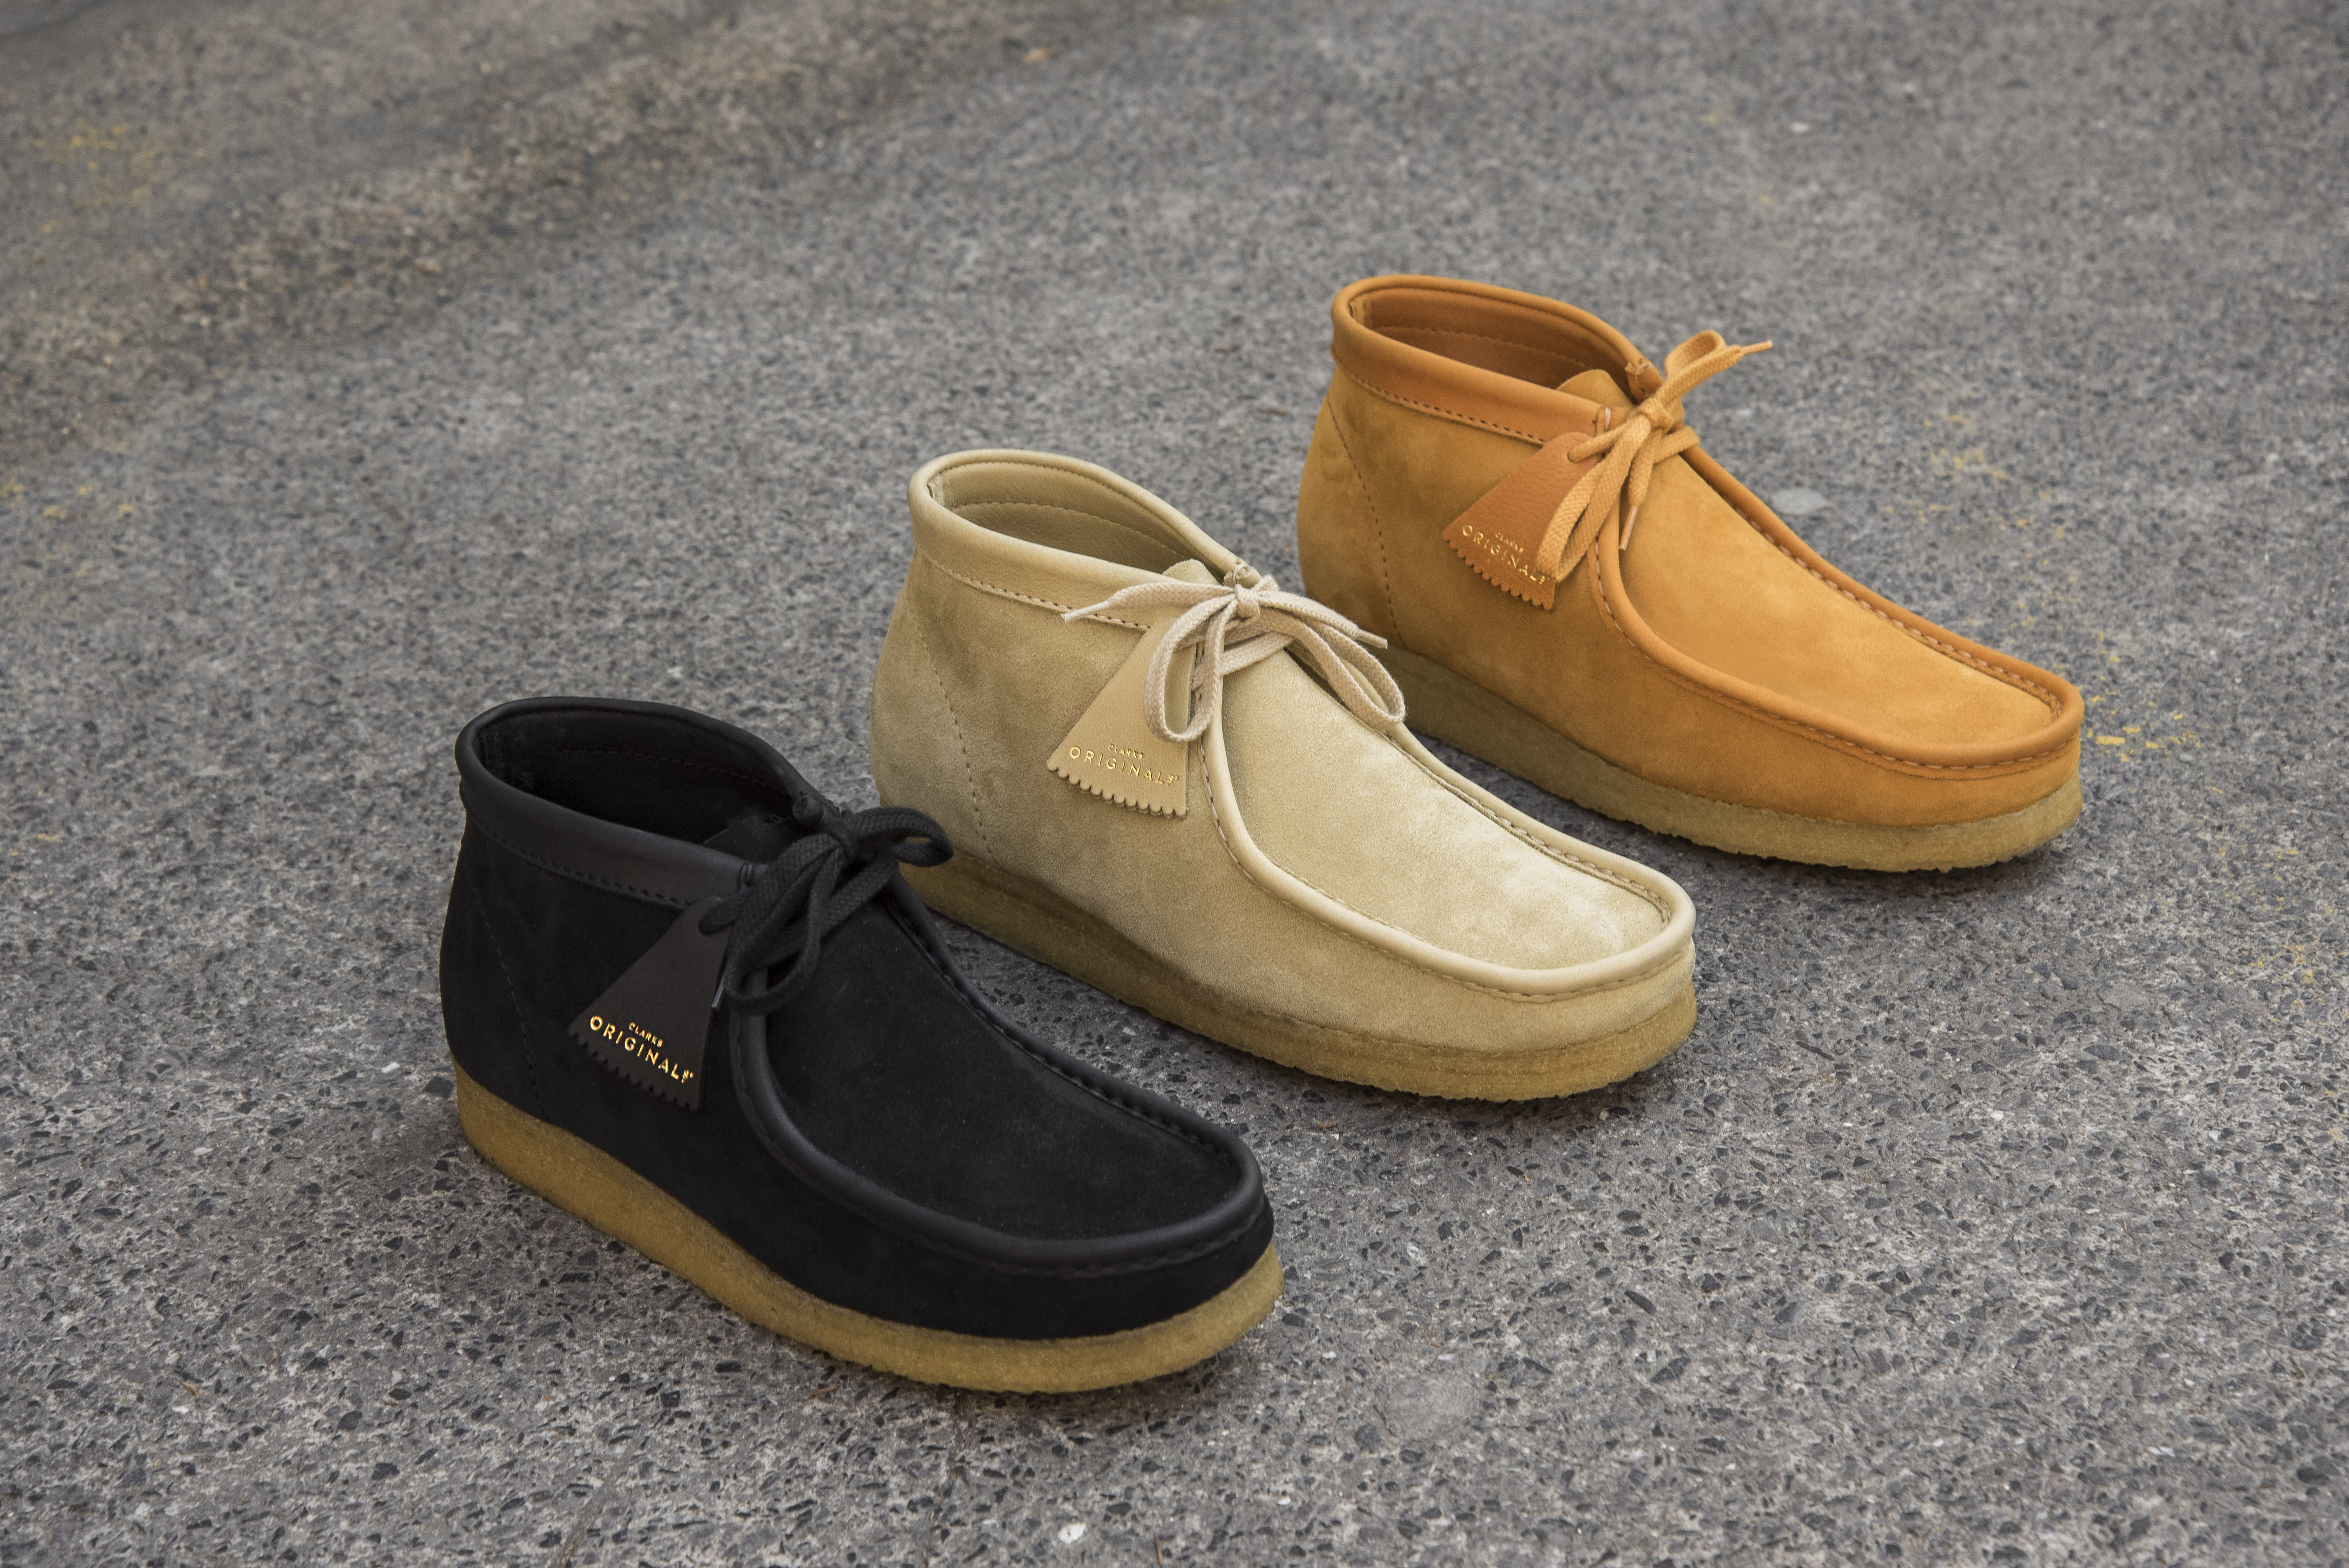 Clarks Originals Wrap the Wallabee in Luxury with the Made in Italy ...